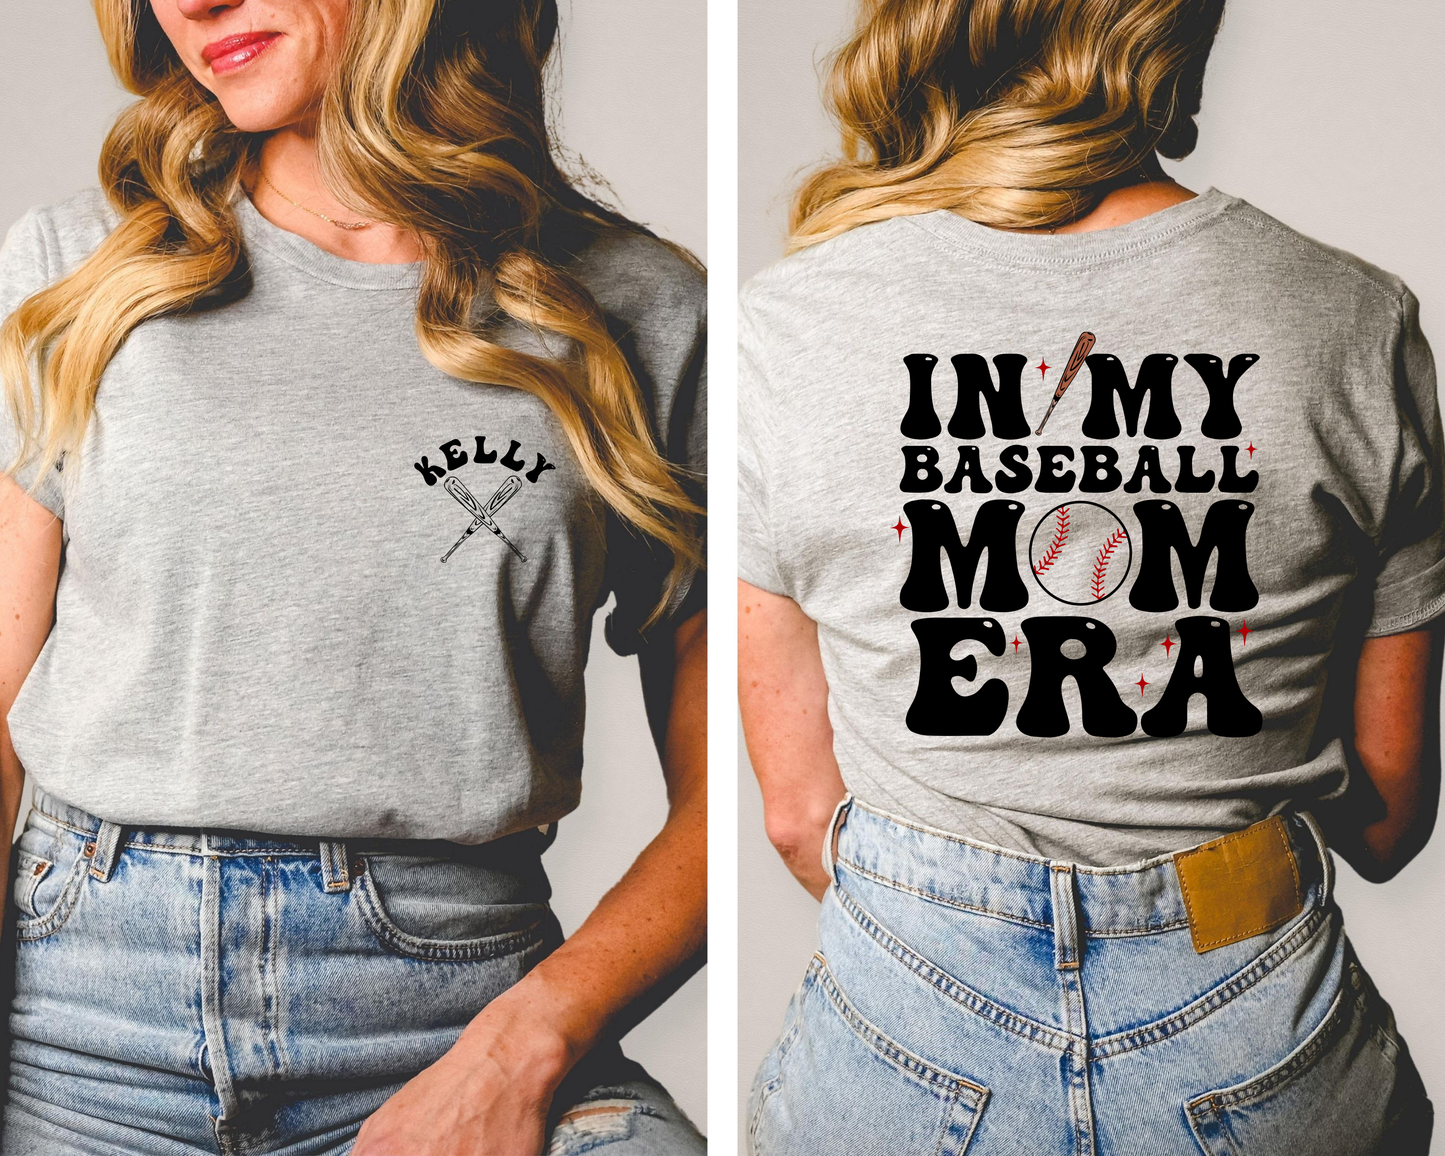 "Basketball Mom Shirt: Show your love for the sport and your child with this stylish tee."